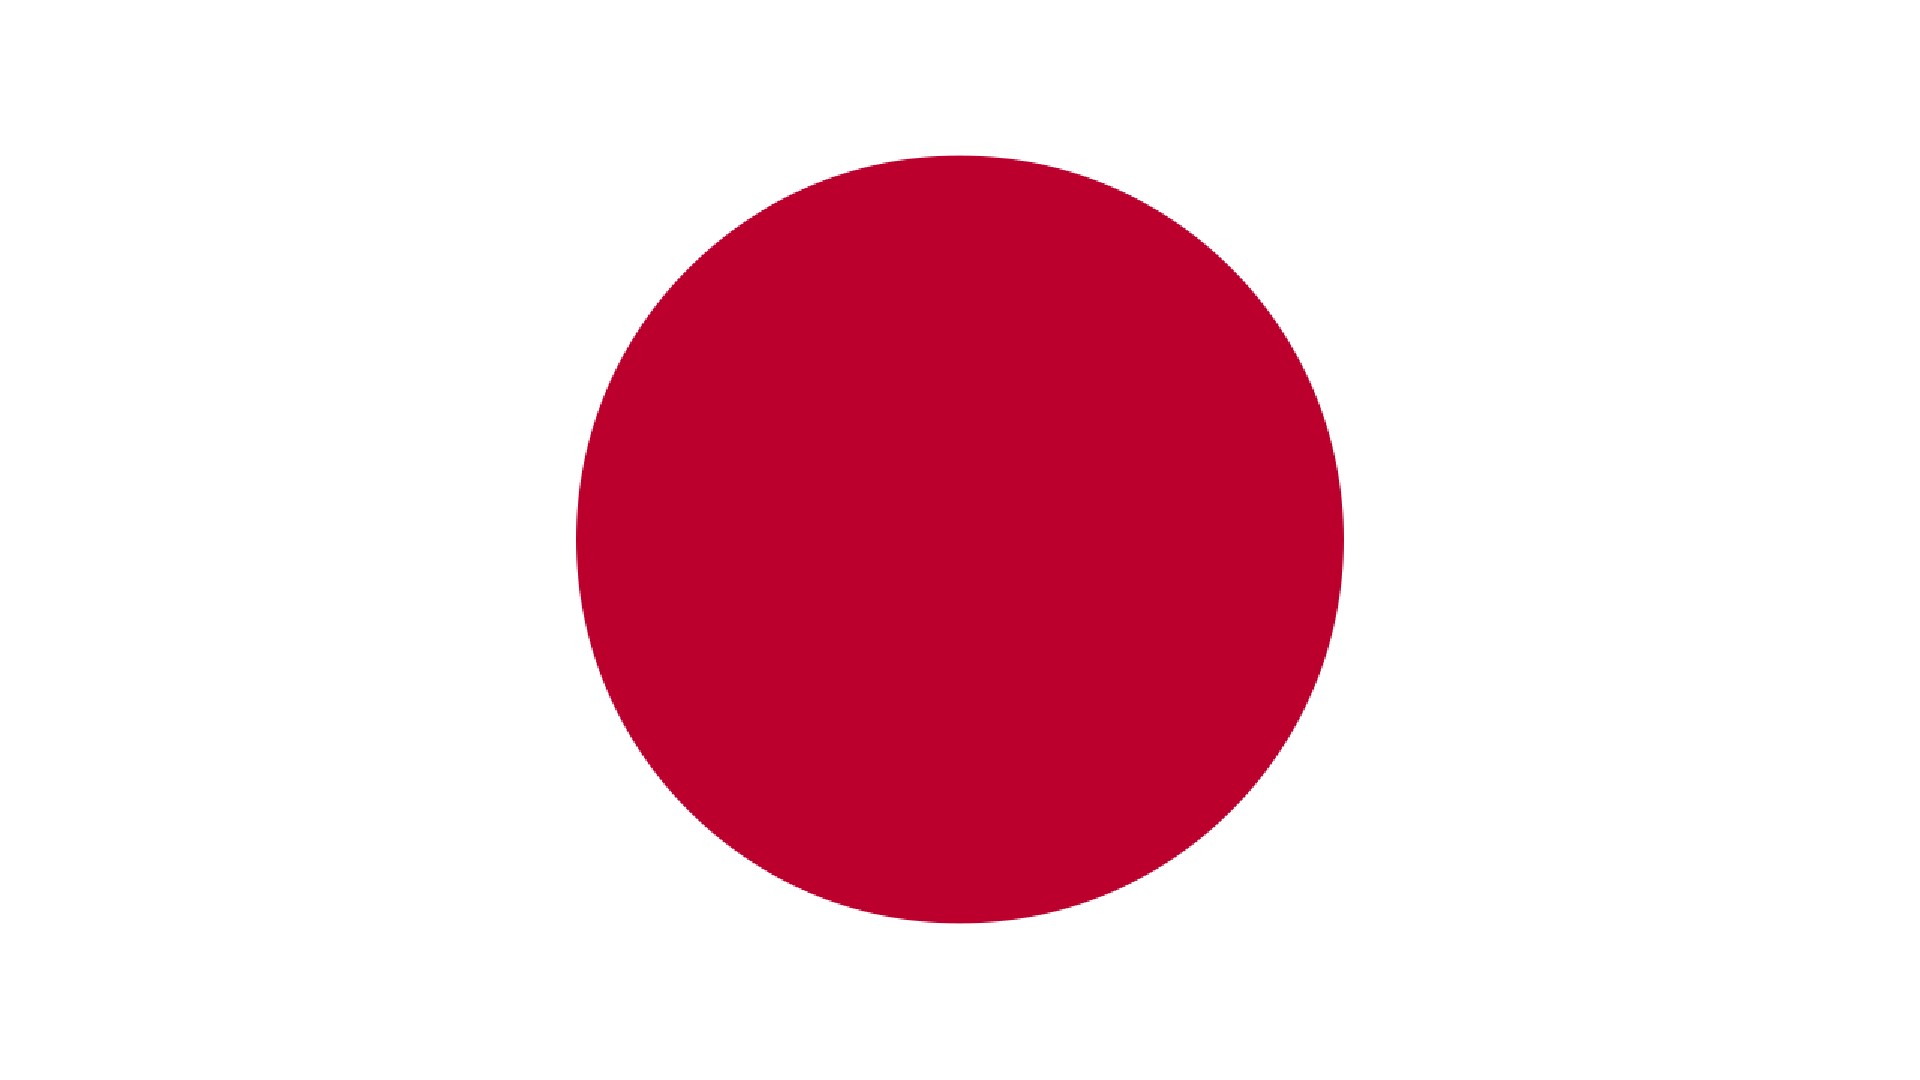 An image of the flag of Japan